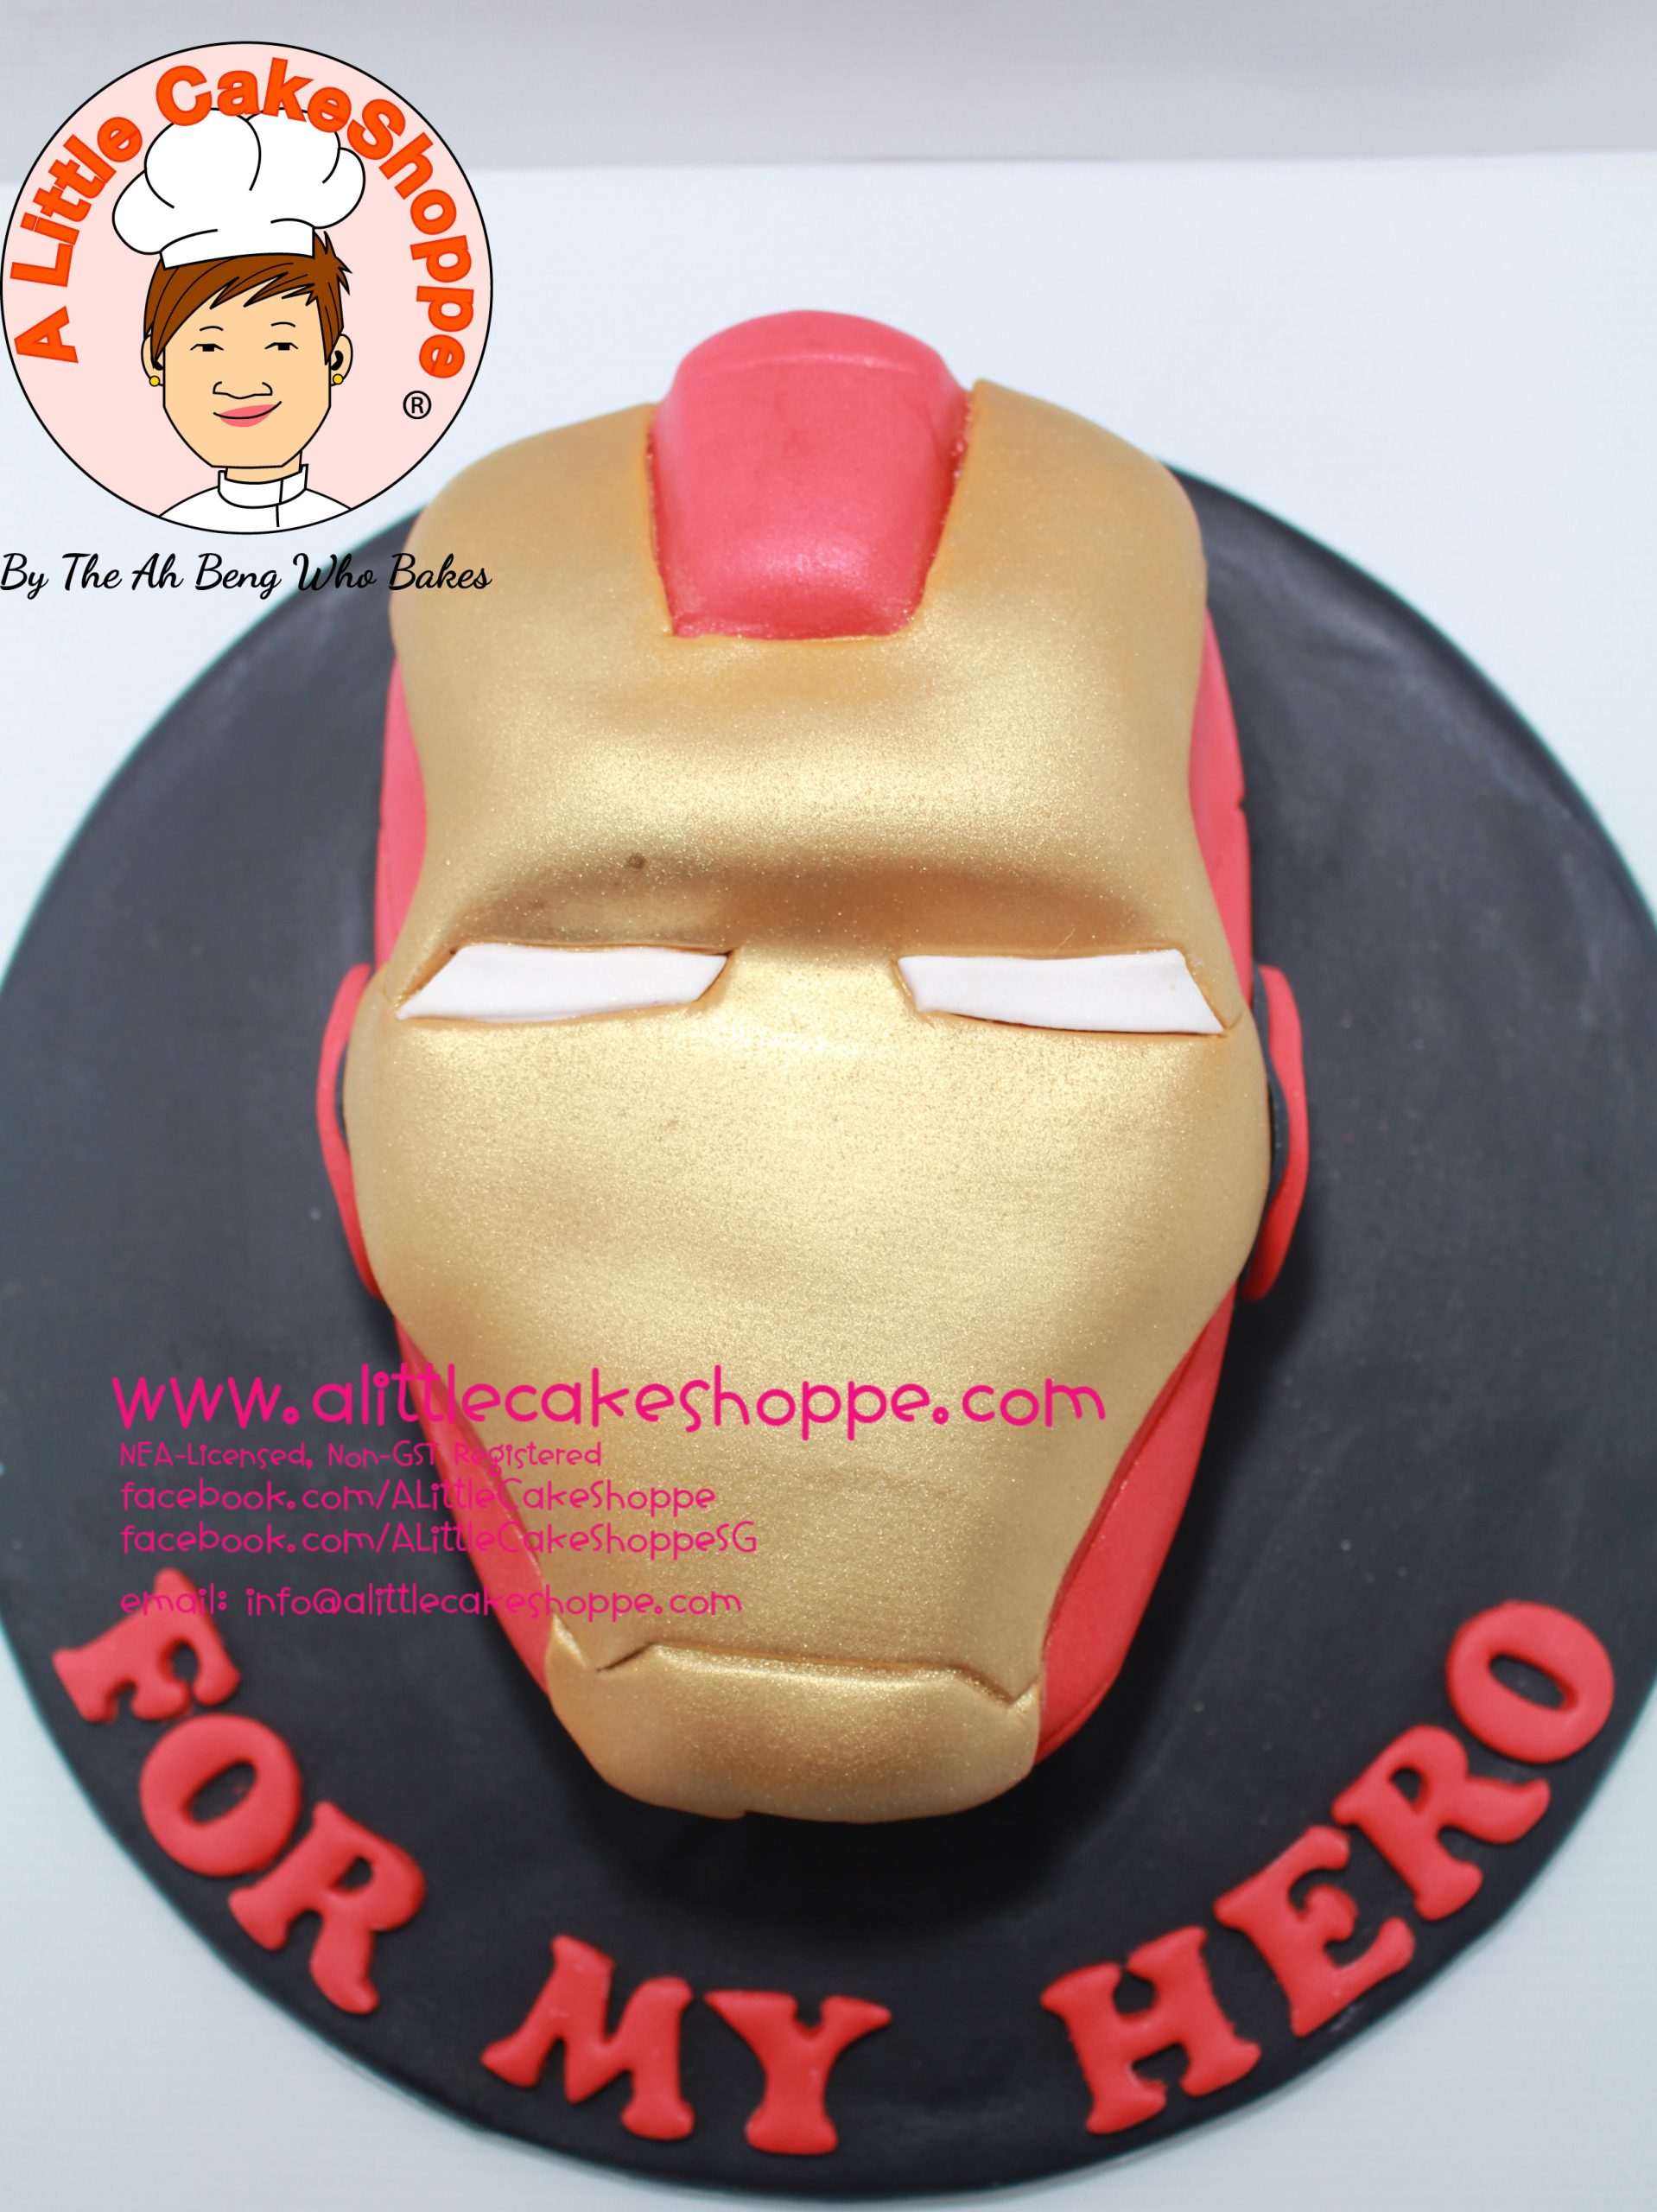 Best Cake Shop Singapore Delivery Best Customised Cake Shop Singapore customise cake custom cake 2D 3D birthday cake cupcakes desserts wedding corporate events anniversary 1st birthday 21st birthday fondant fresh cream buttercream cakes alittlecakeshoppe a little cake shoppe compliments review singapore bakers SG cake shop cakeshop ah beng who bakes sgbakes novelty cakes sgcakes licensed sfa nea cake delivery celebration cakes kids birthday cake surprise cake adult children avengers ironman superhero